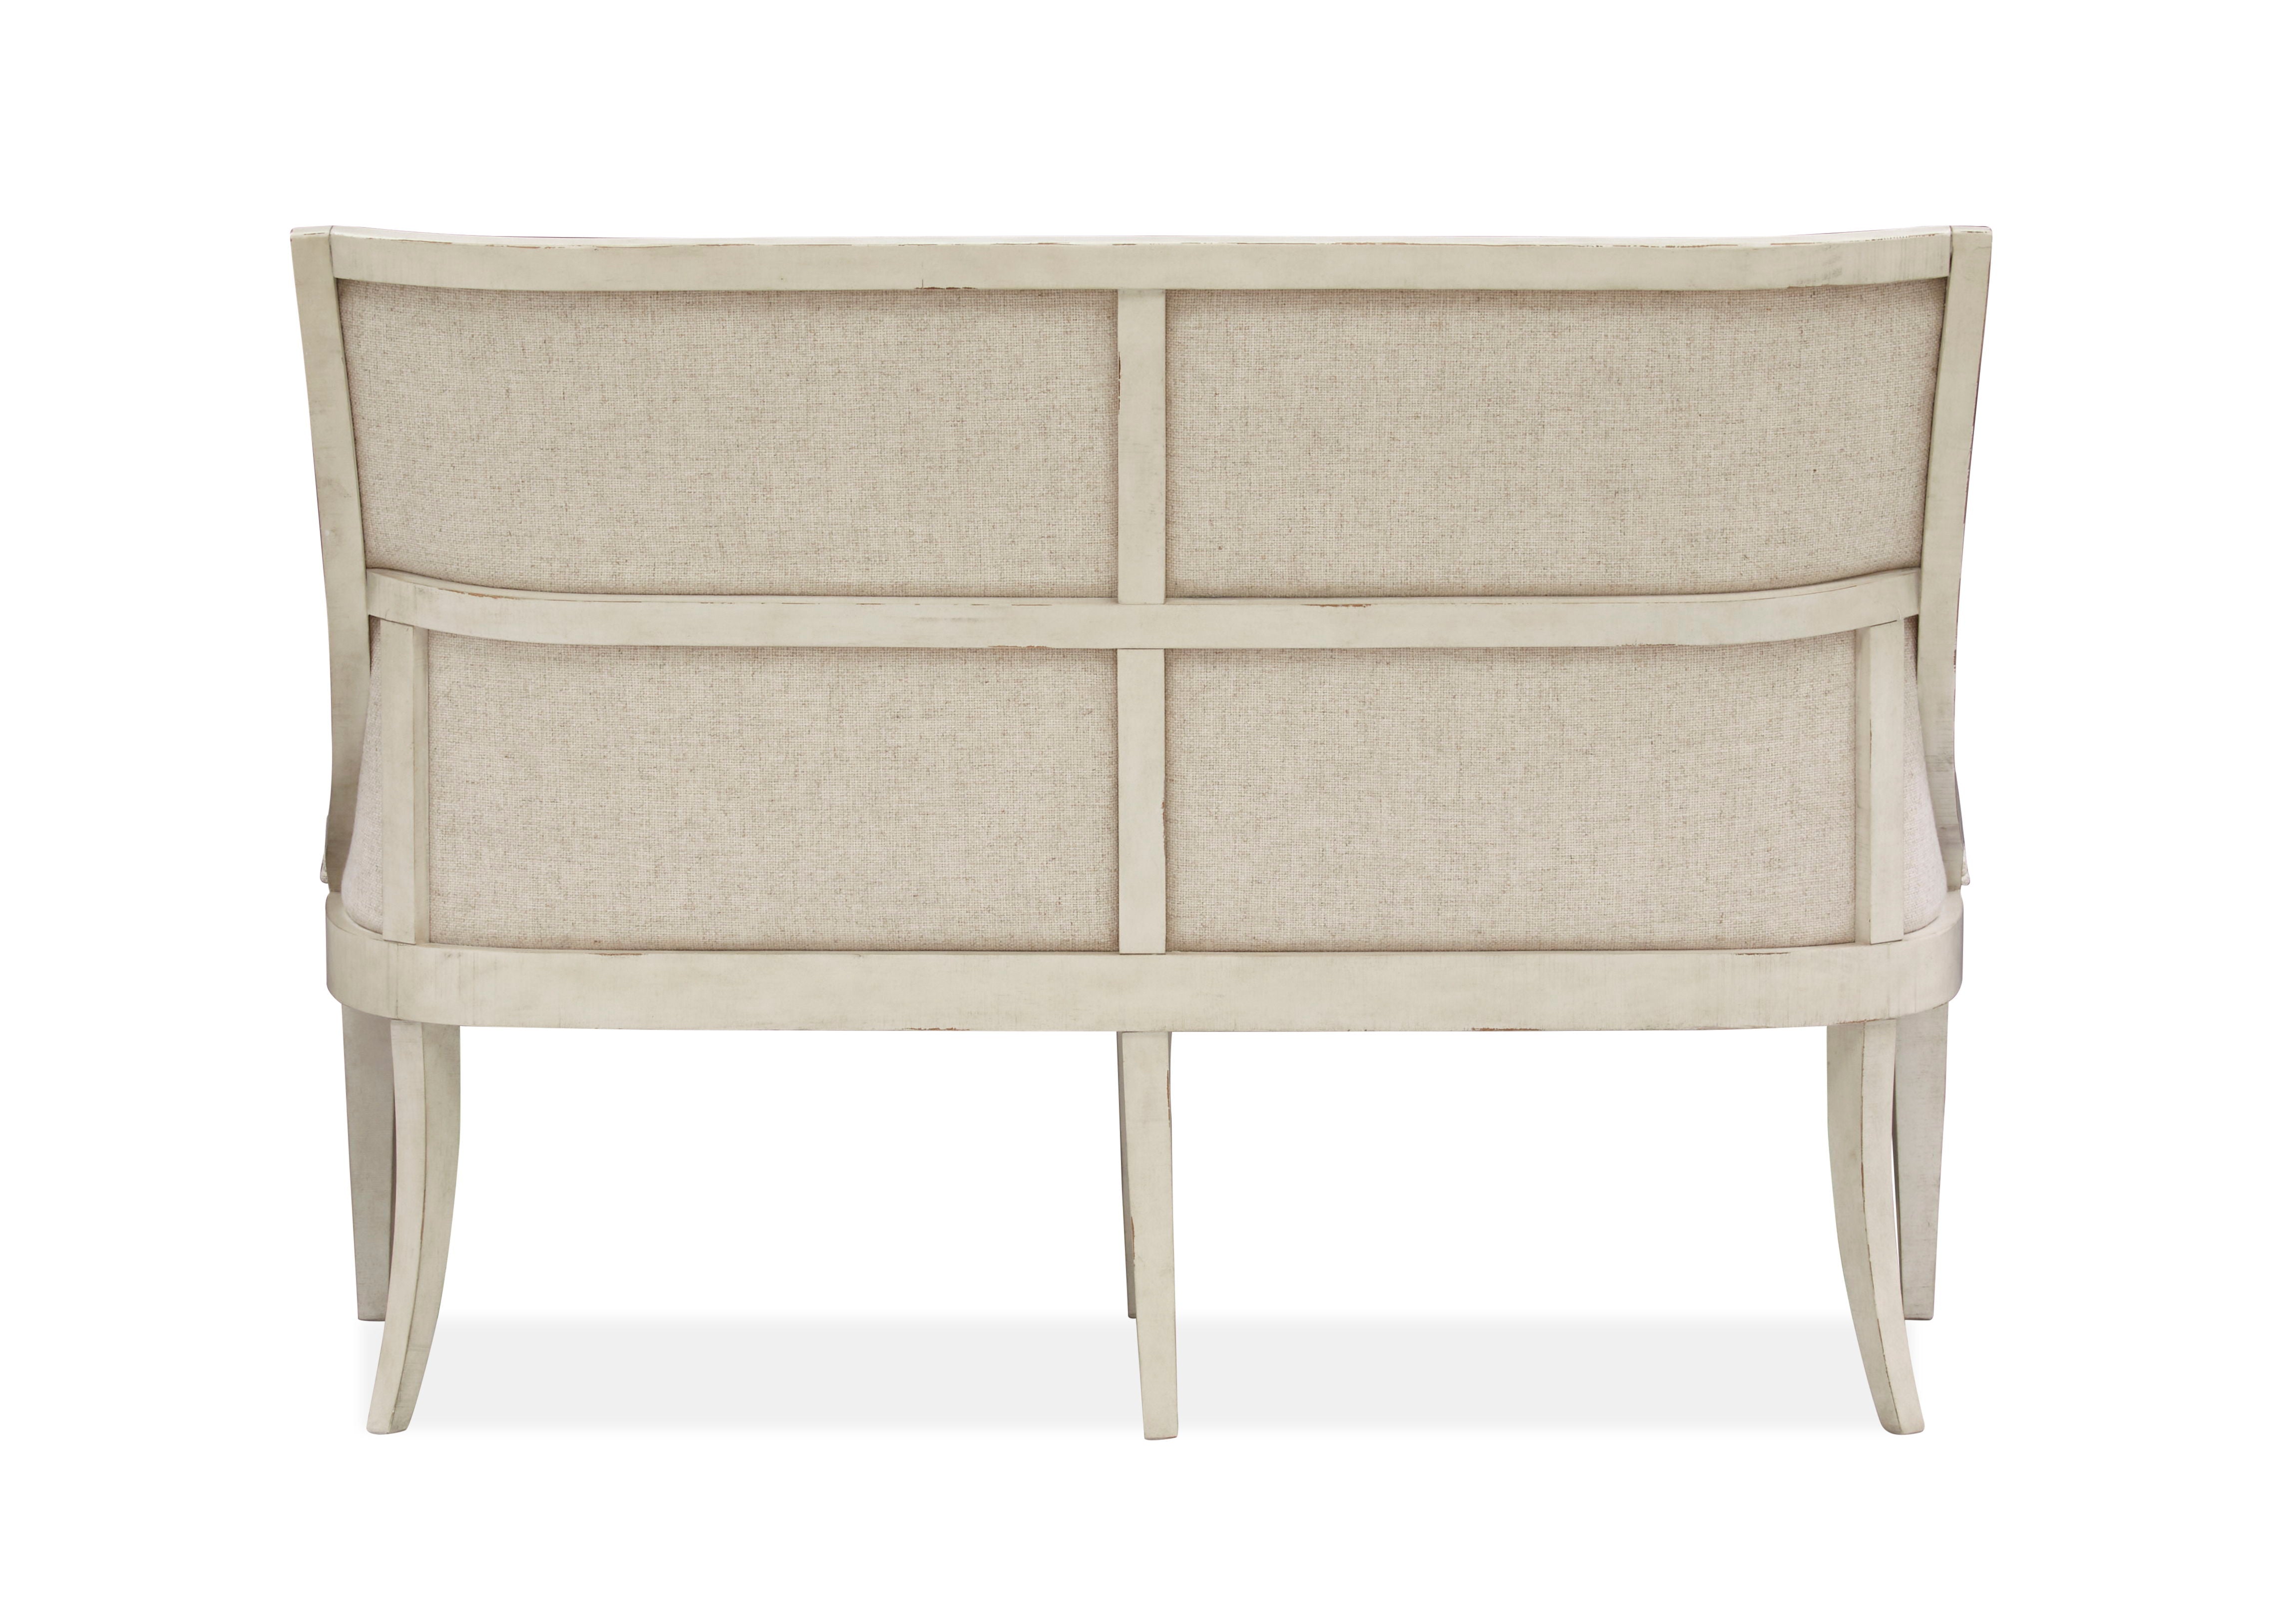 Newport - Bench With Upholstered Seat & Back - Alabaster